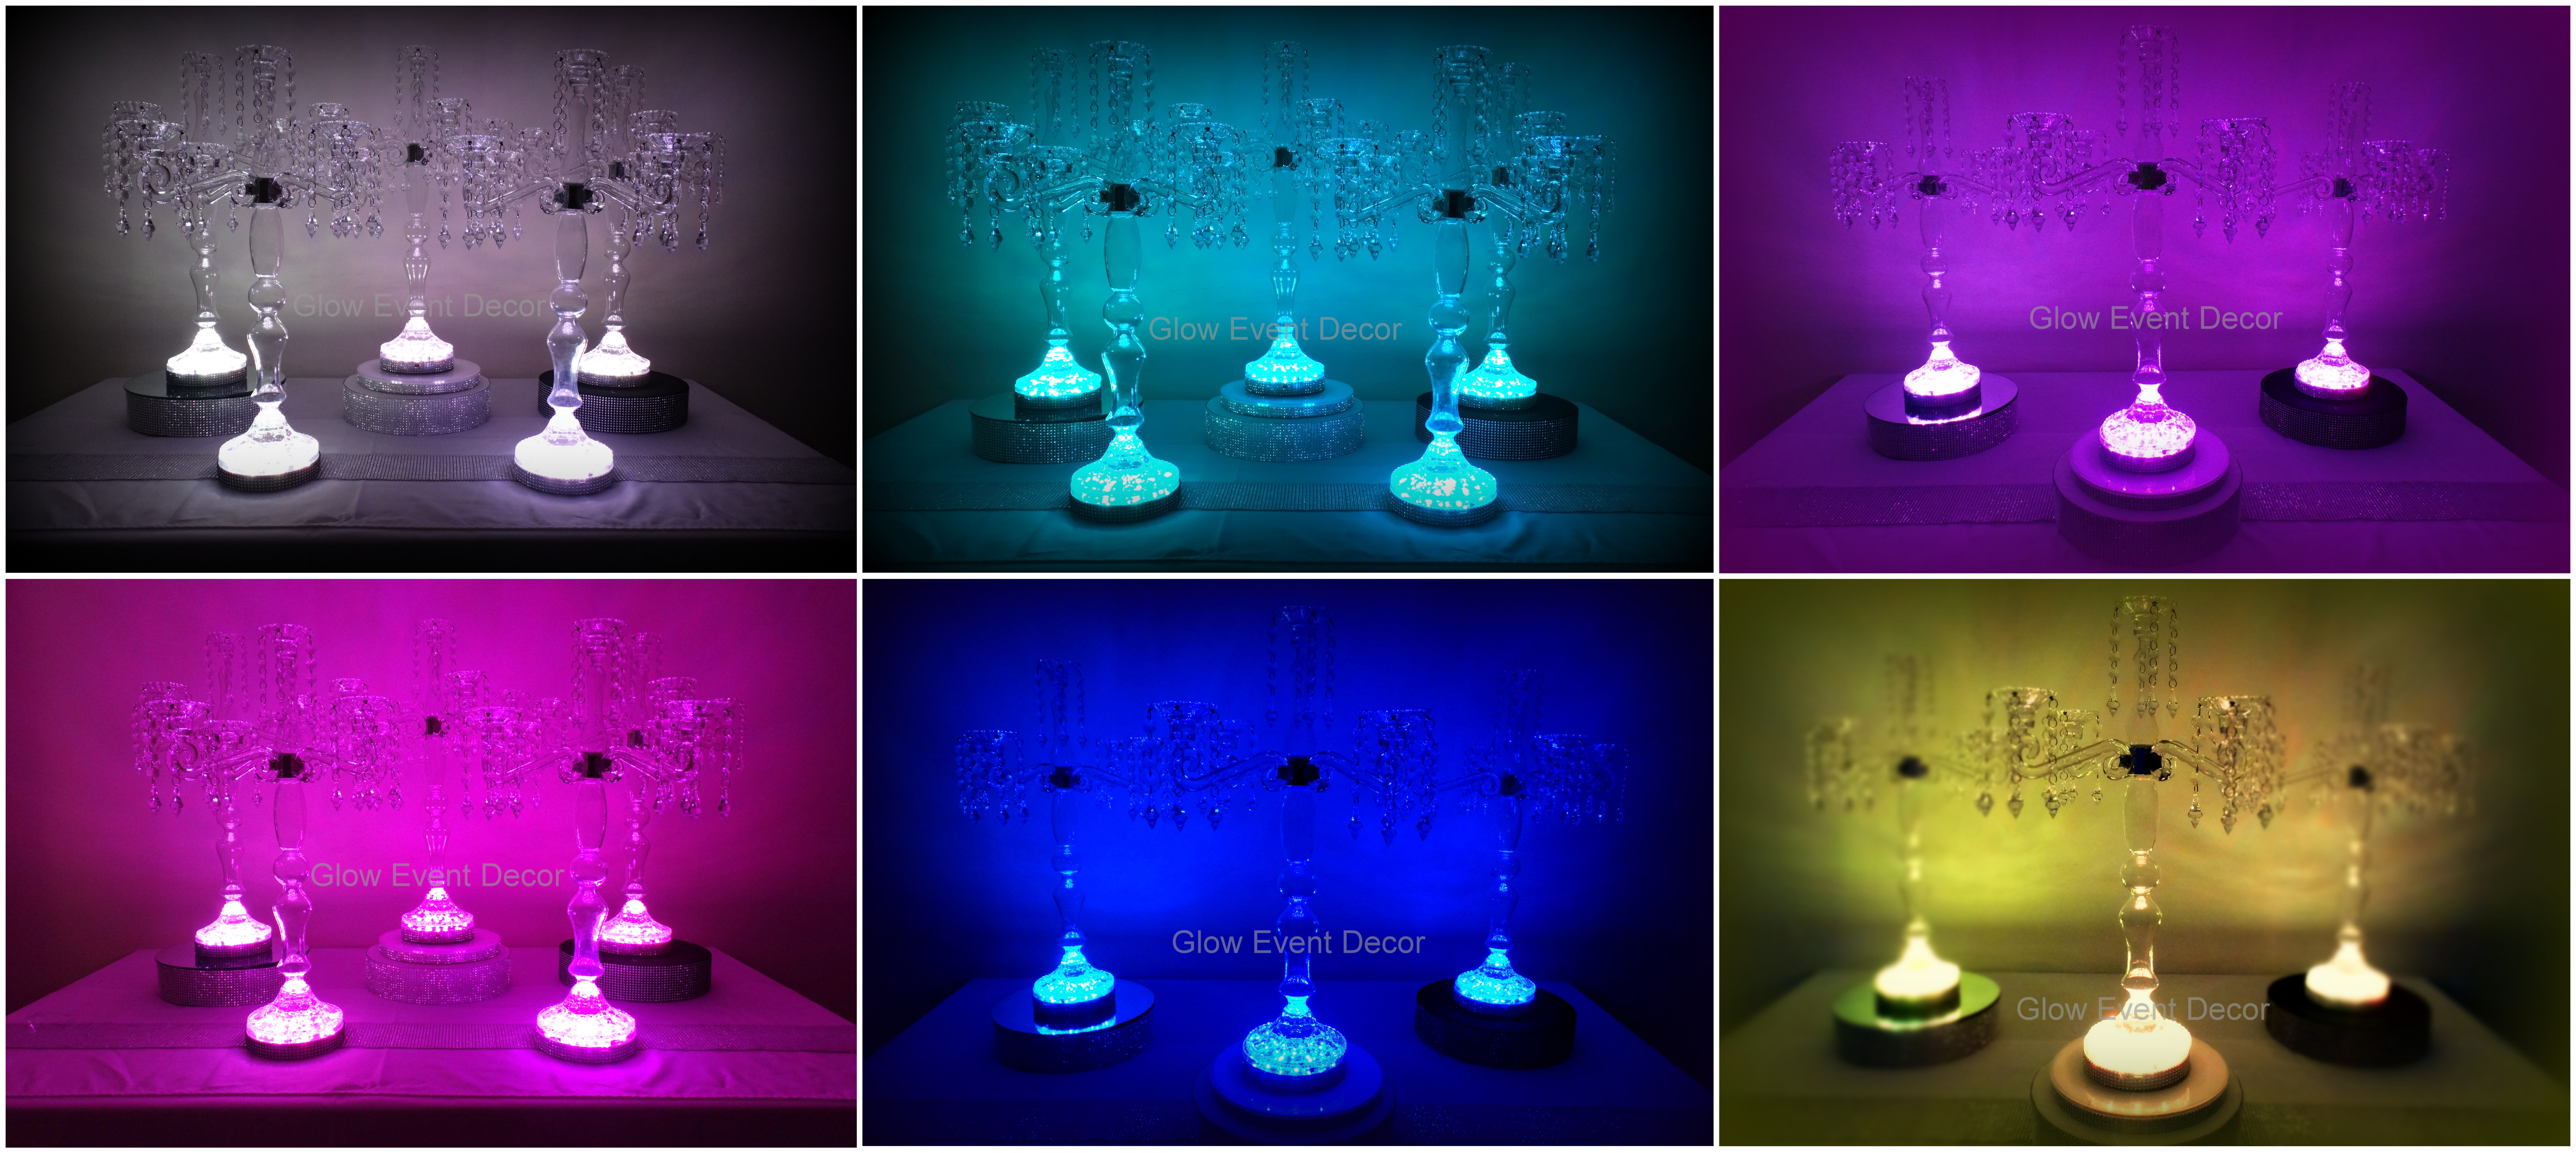 LED 5 arm glass candelabras table decoration centrepiece for hire in adelaide for wedding, engagment, functiLED 5 arm glass candelabras table decoration centrepiece for hire in adelaide for wedding, engagement function from glow event decor